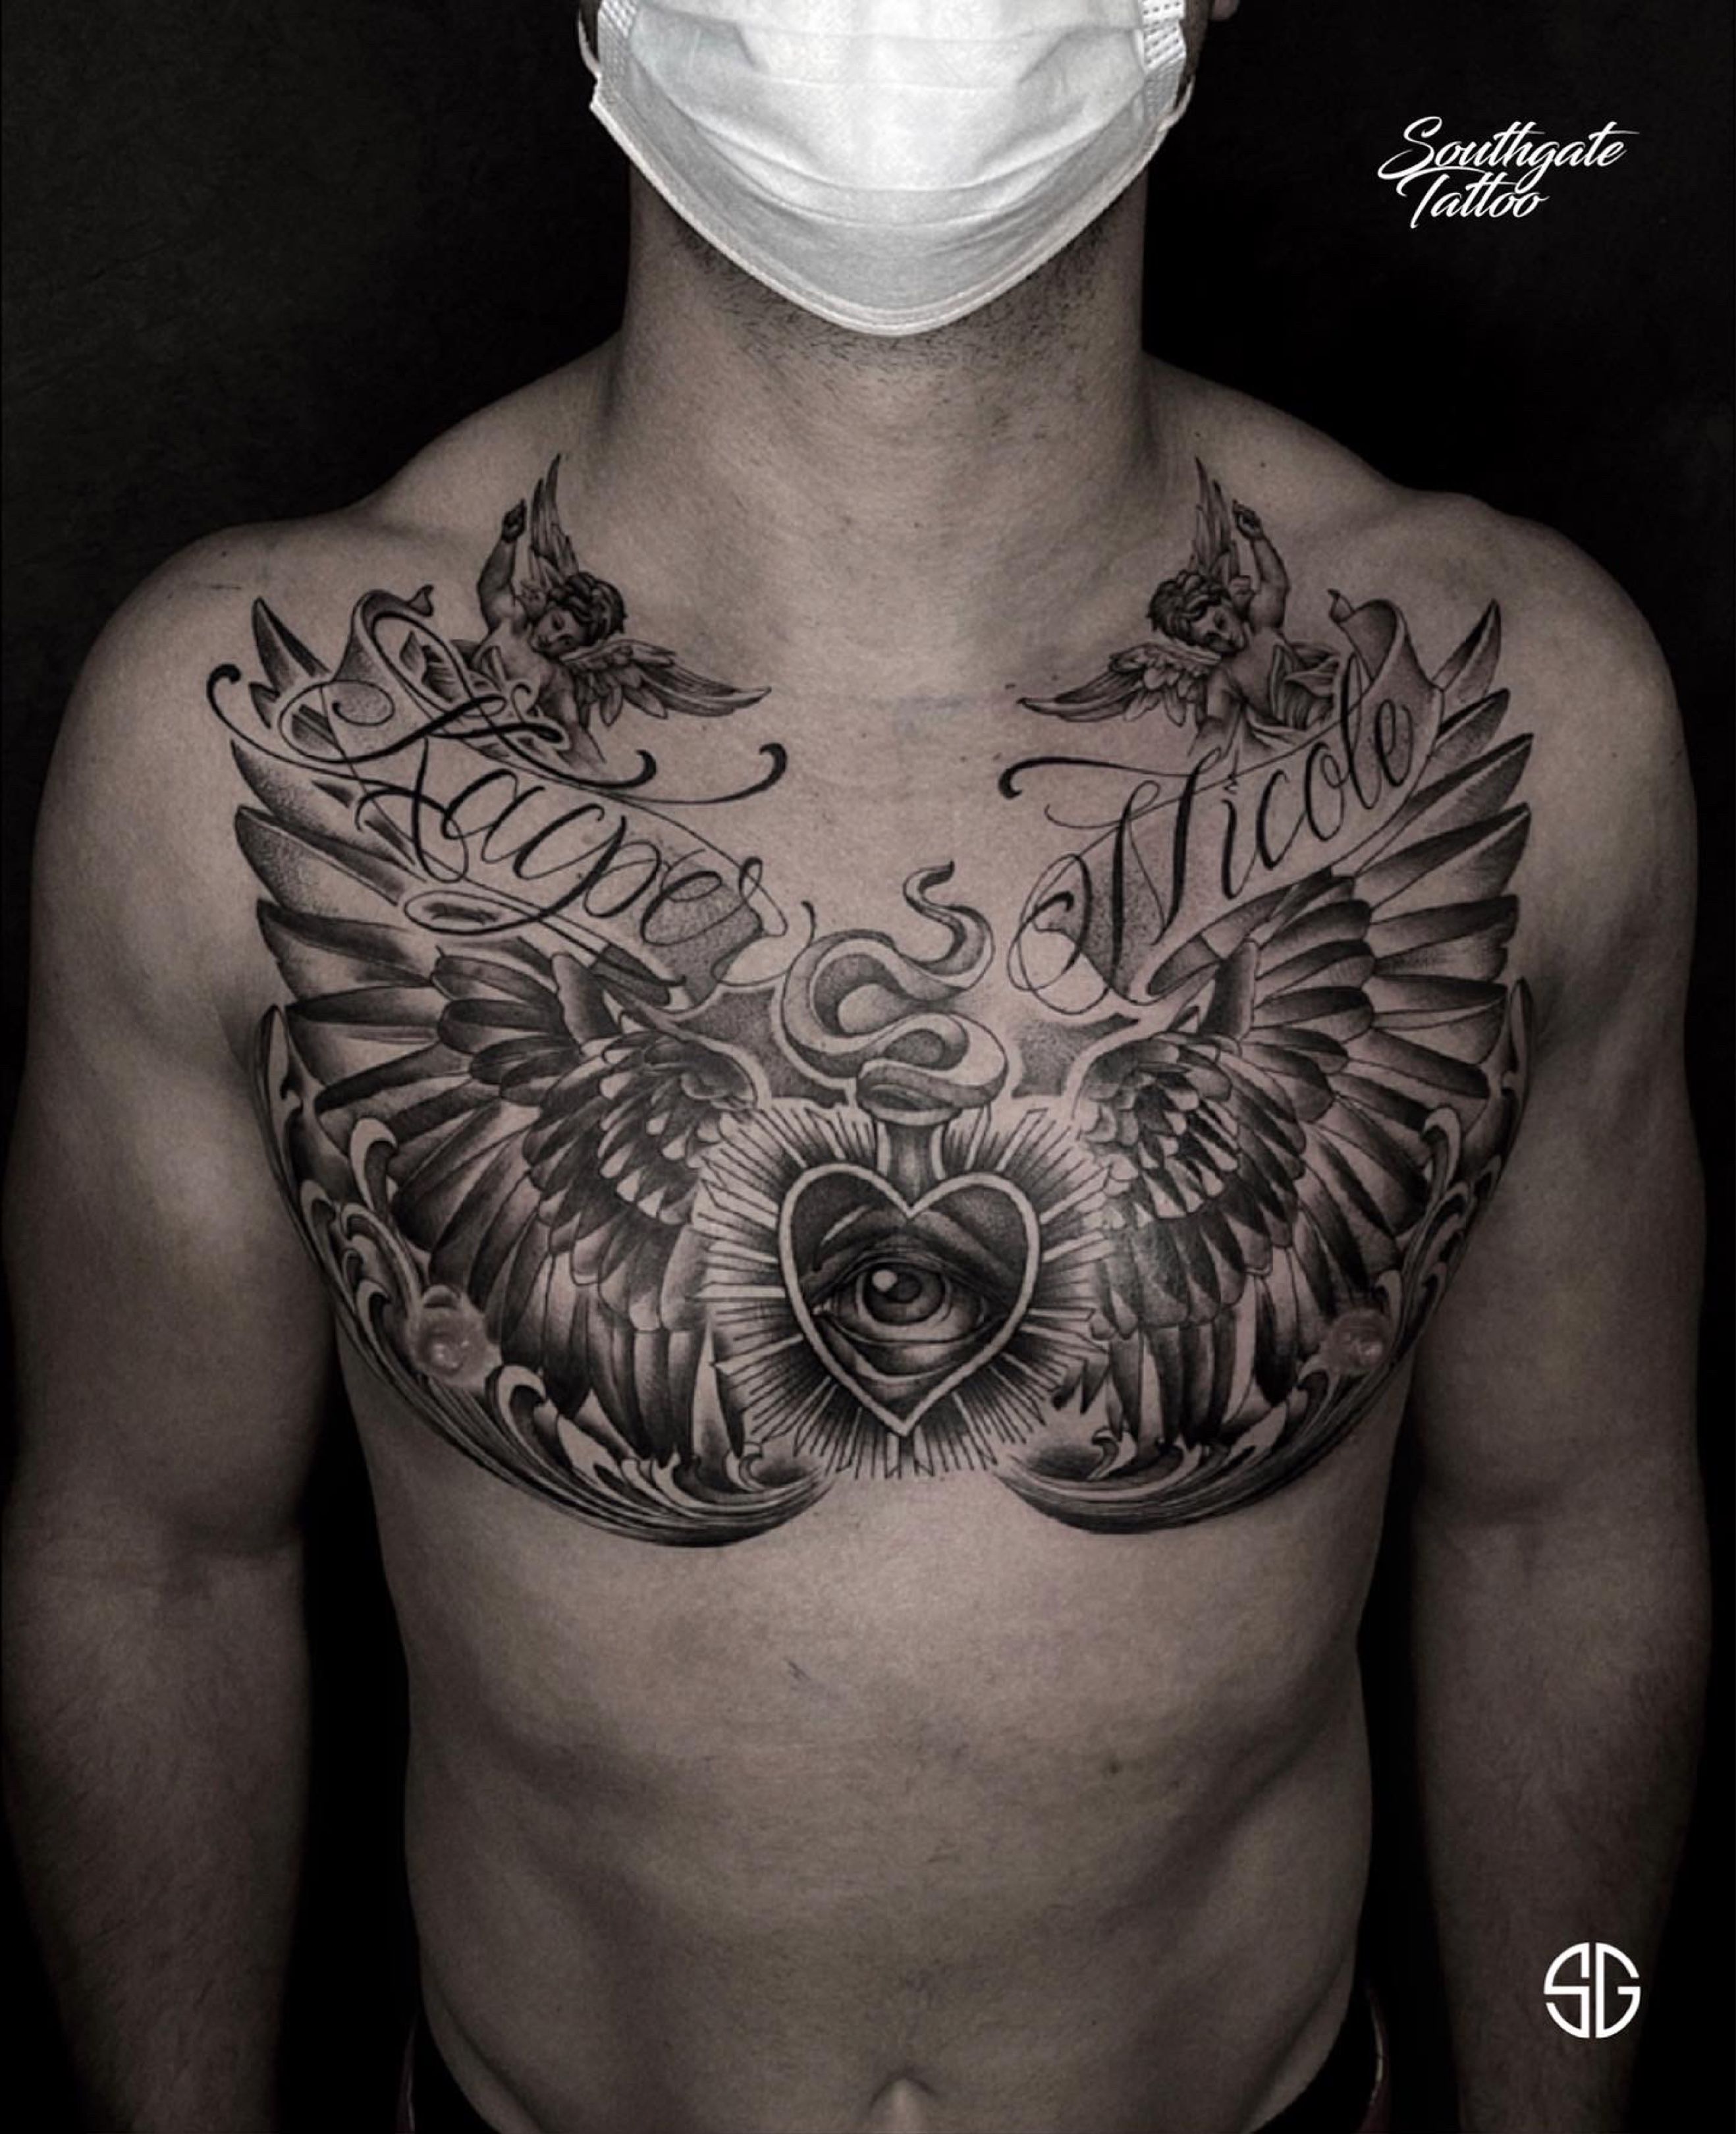 Tattoo uploaded by Southgate SG Tattoo & Piercing Studio • ♥️ custom chest  piece by our resident @. Book one for yourself:  👉🏻@southgatetattoo • • • #chesttattoo #blackwork #southgatetattoo  #sgtattoo #sg #customtattoo #